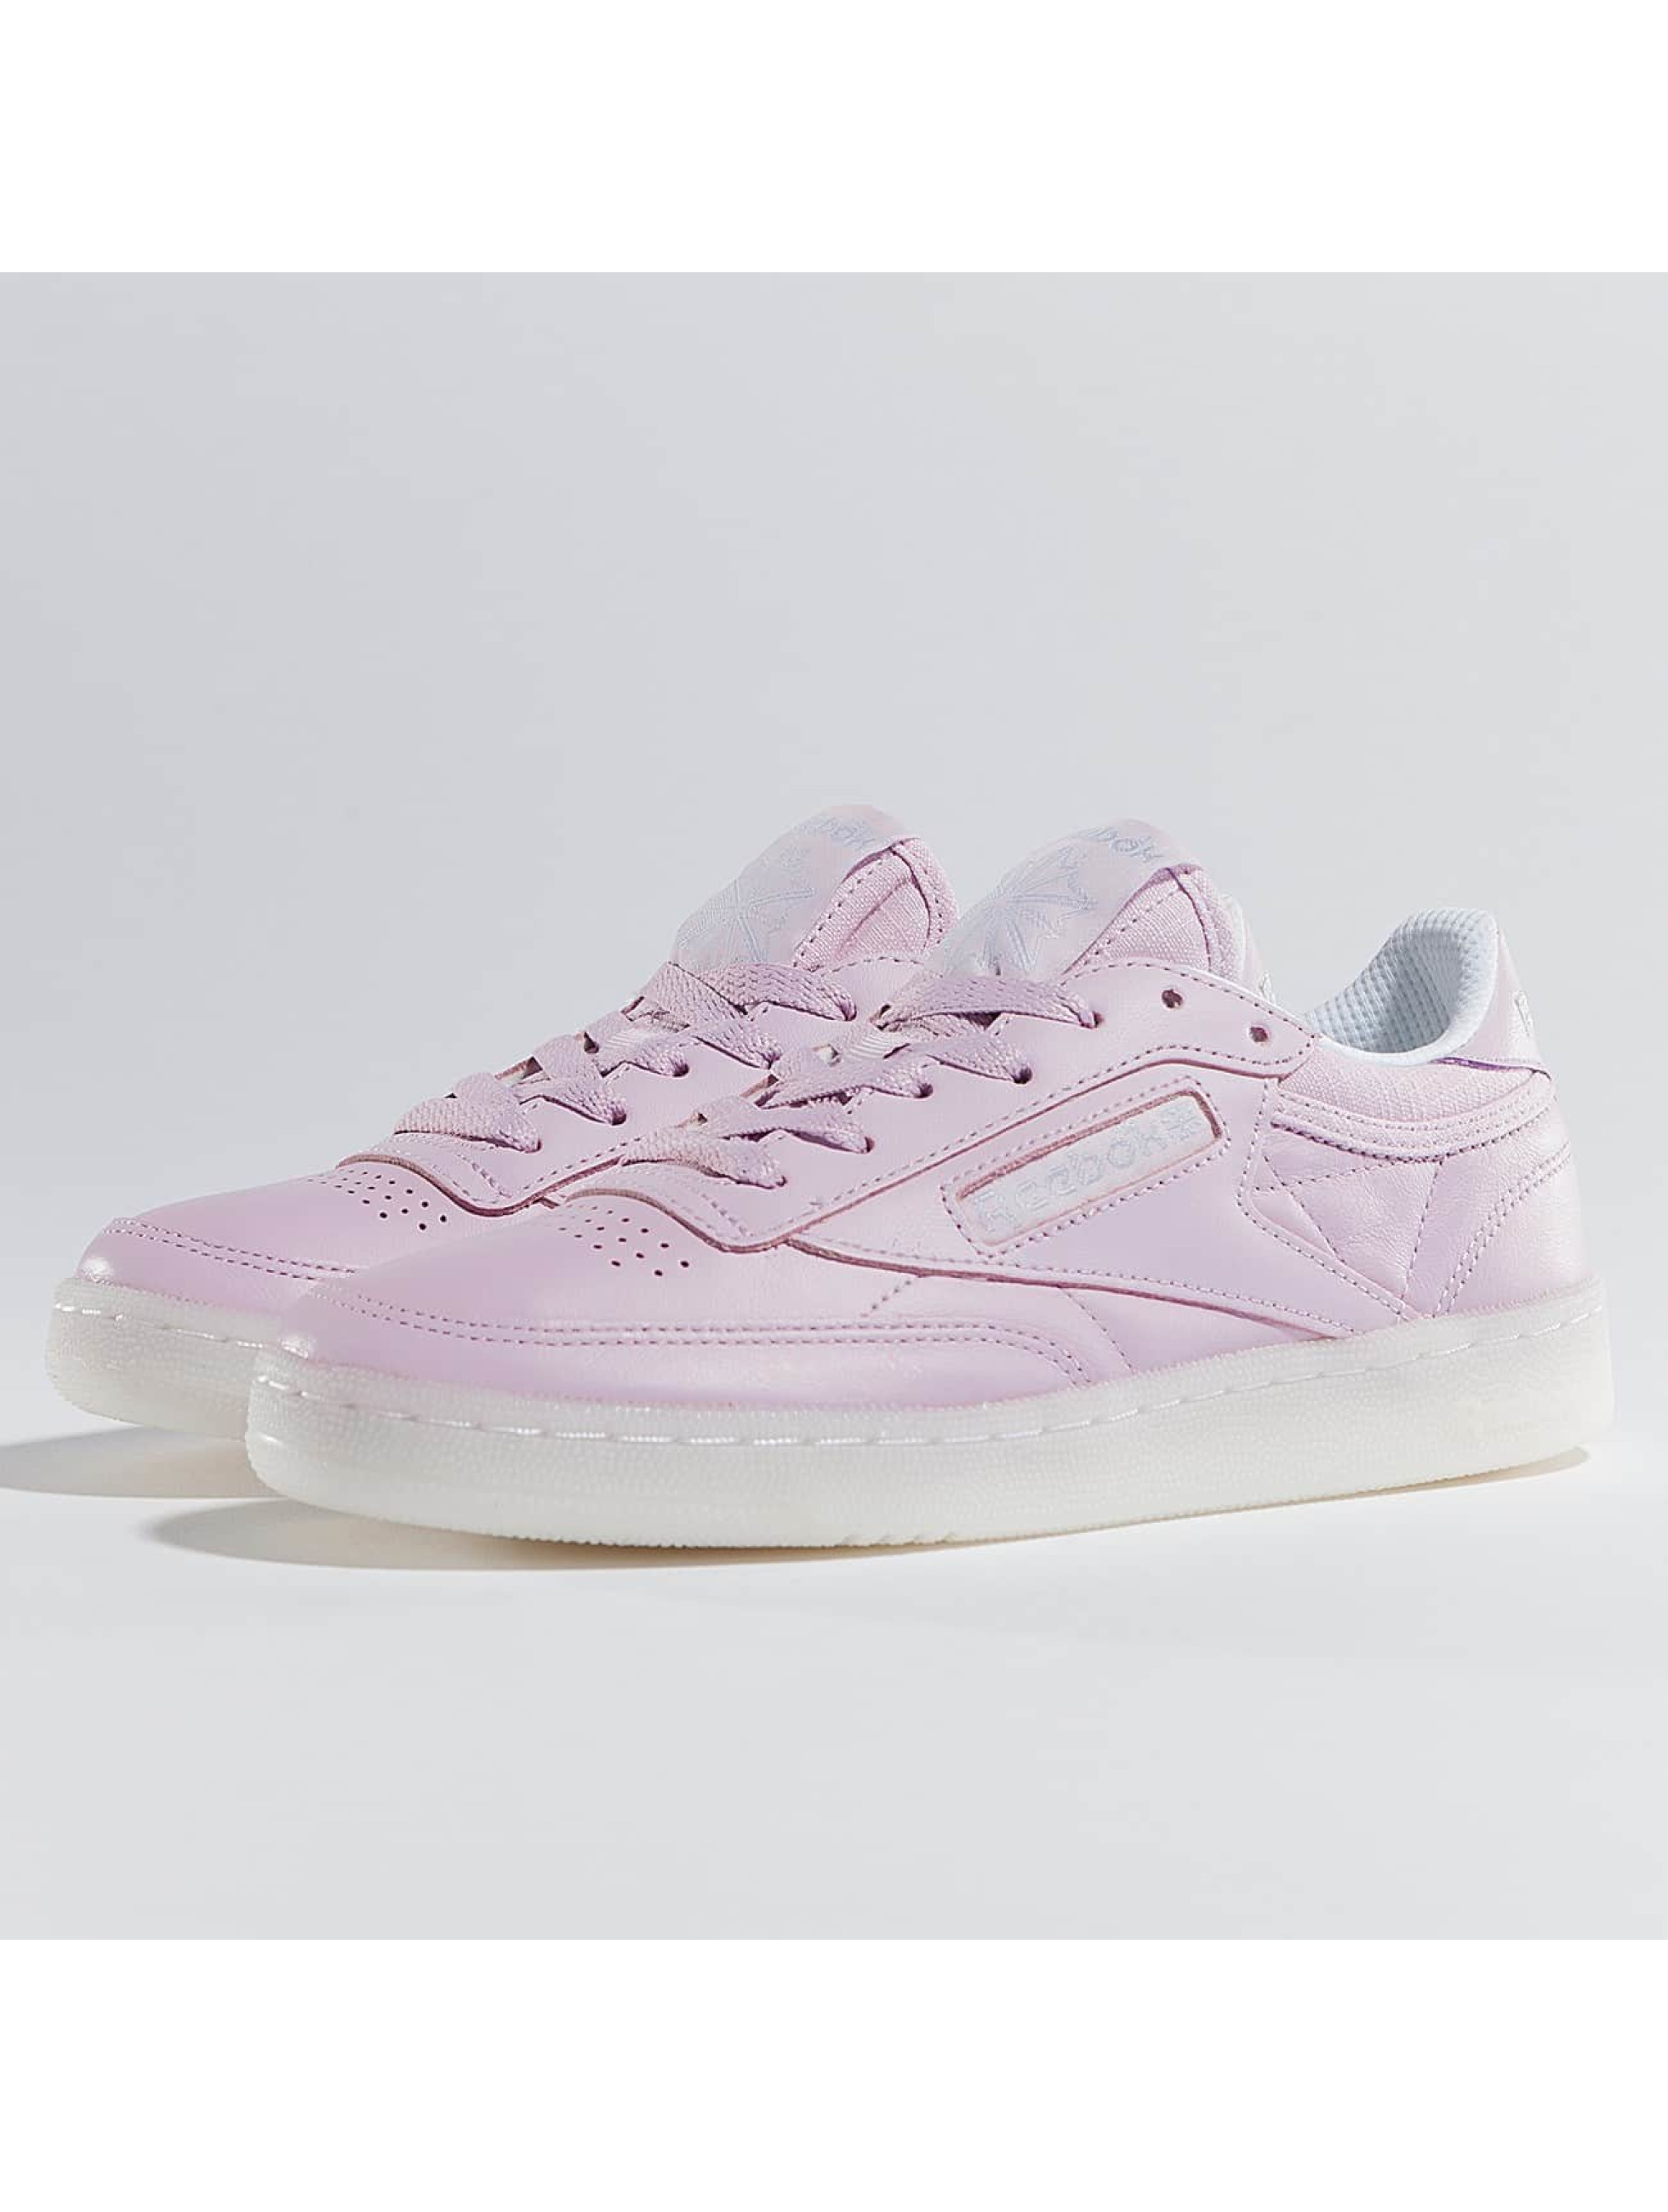 Reebok Chaussures / Baskets Club C 85 On The Court en pourpre